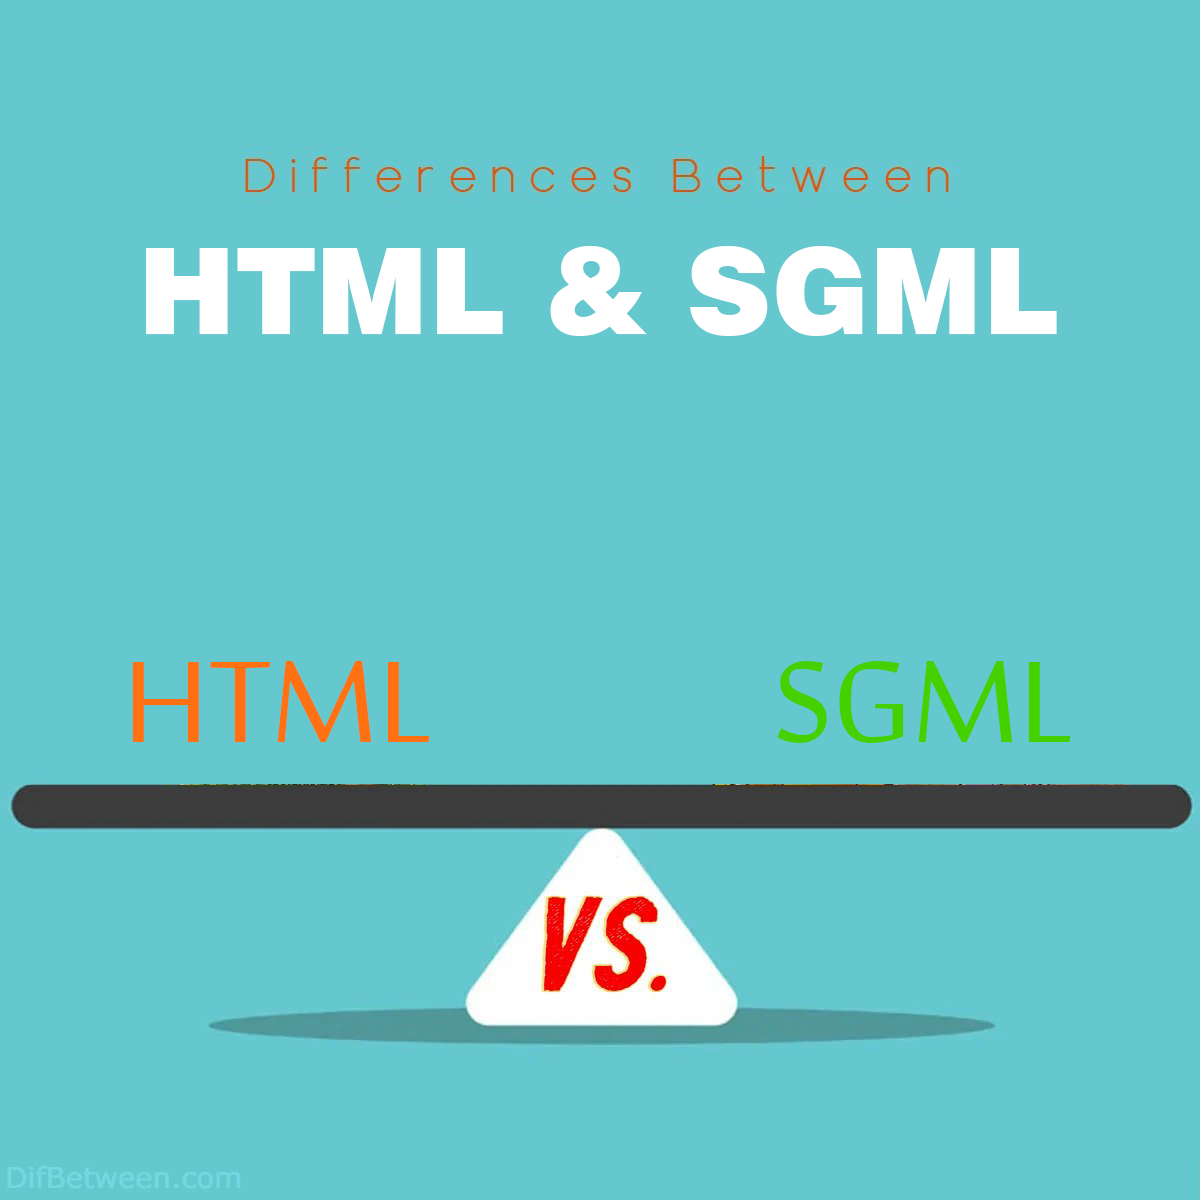 Key Differences Between HTML and SGML